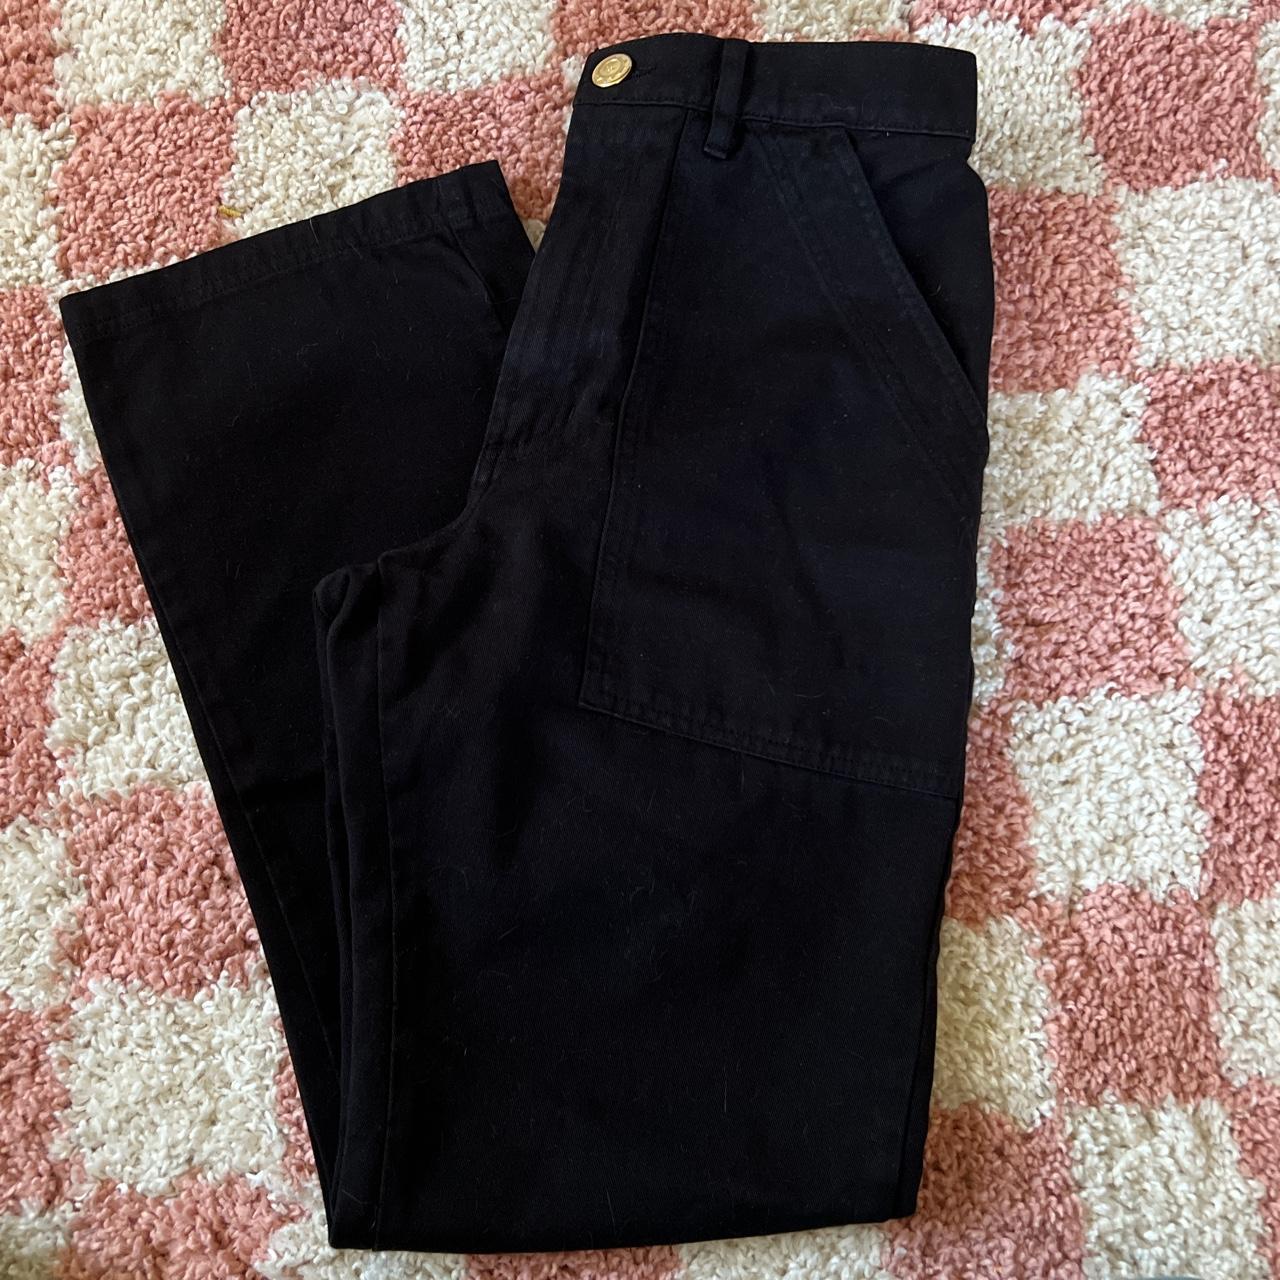 Big Bud Press work pants in basic black. These are... - Depop